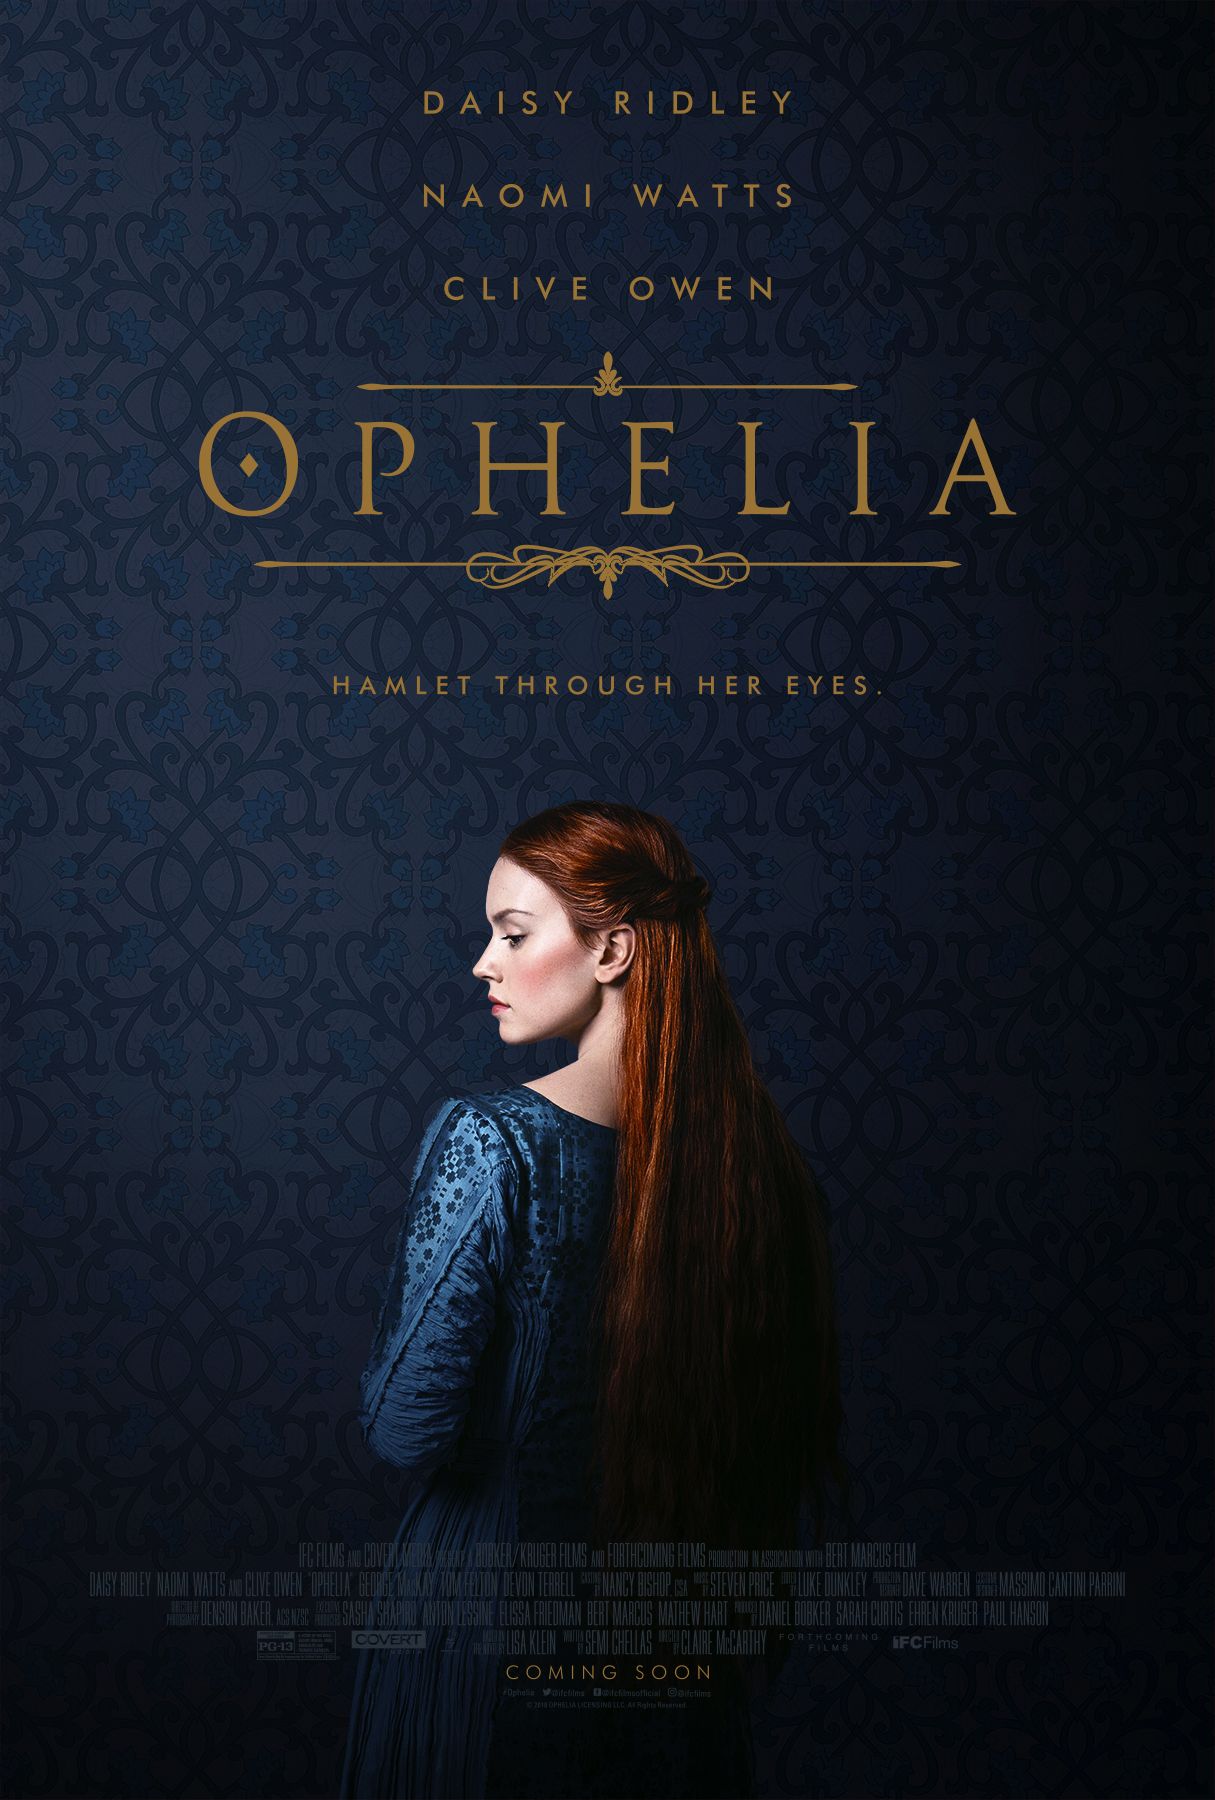 cover of Ophelia featuring Daisy Ridley